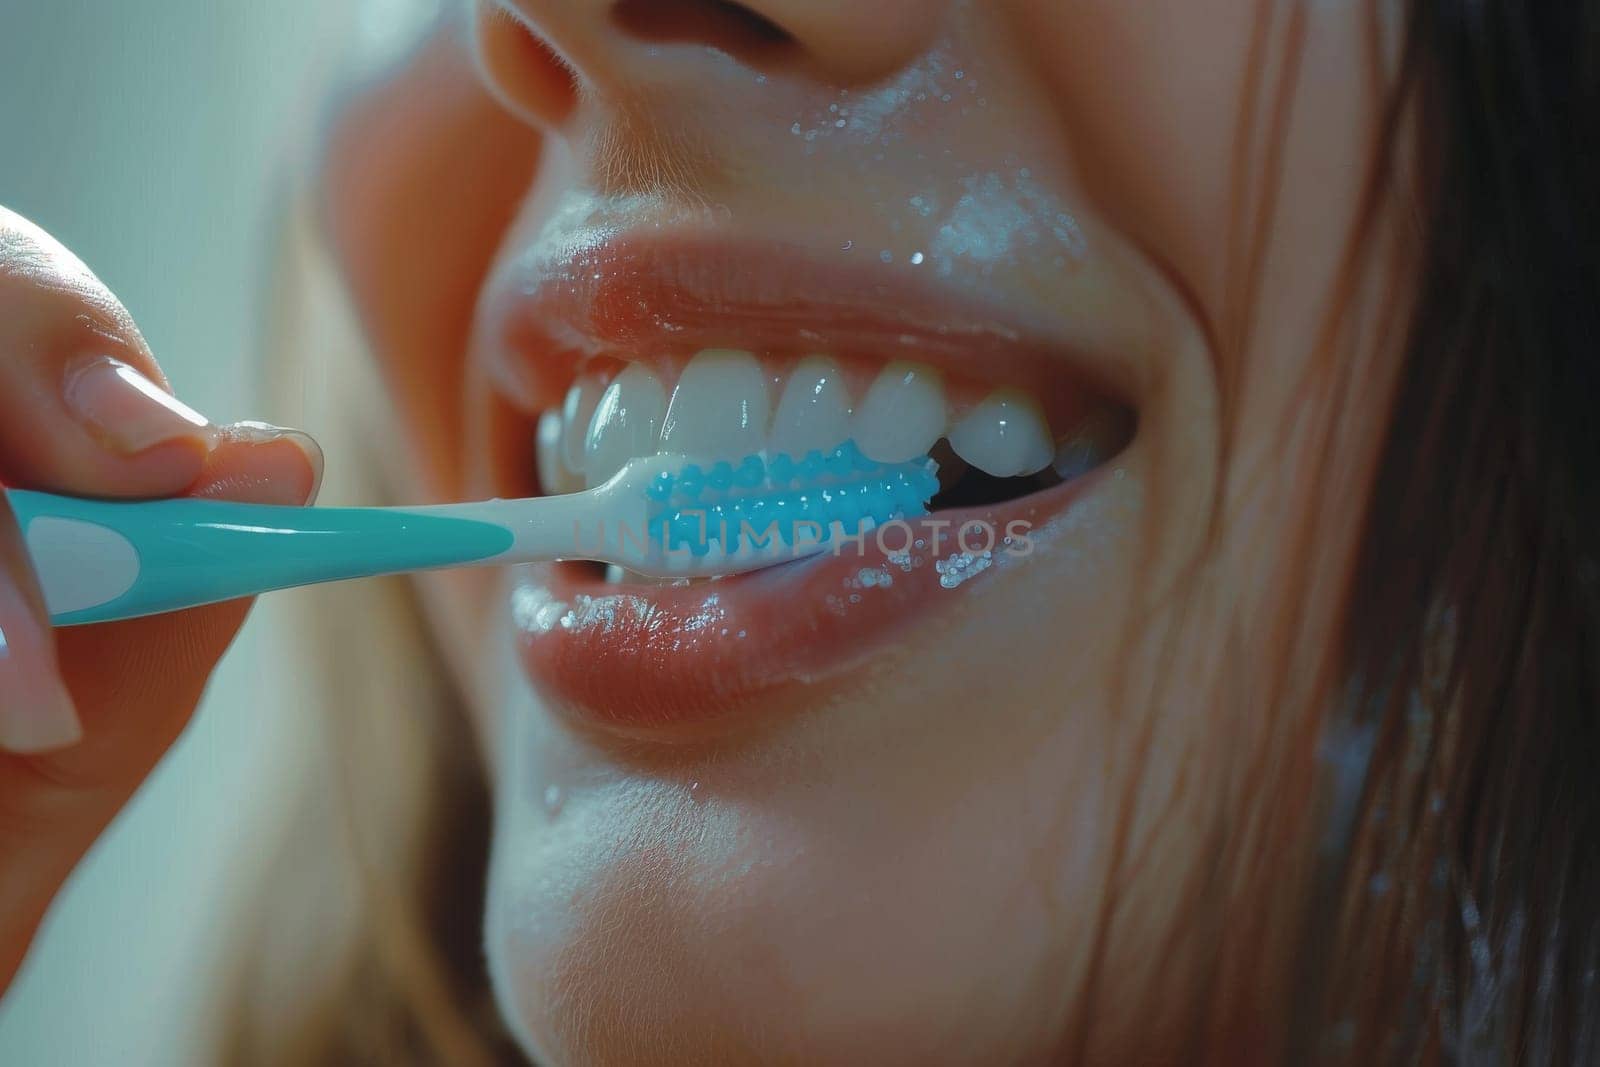 A woman is brushing her teeth with a blue toothbrush. She has a smile on her face, indicating that she is happy and content